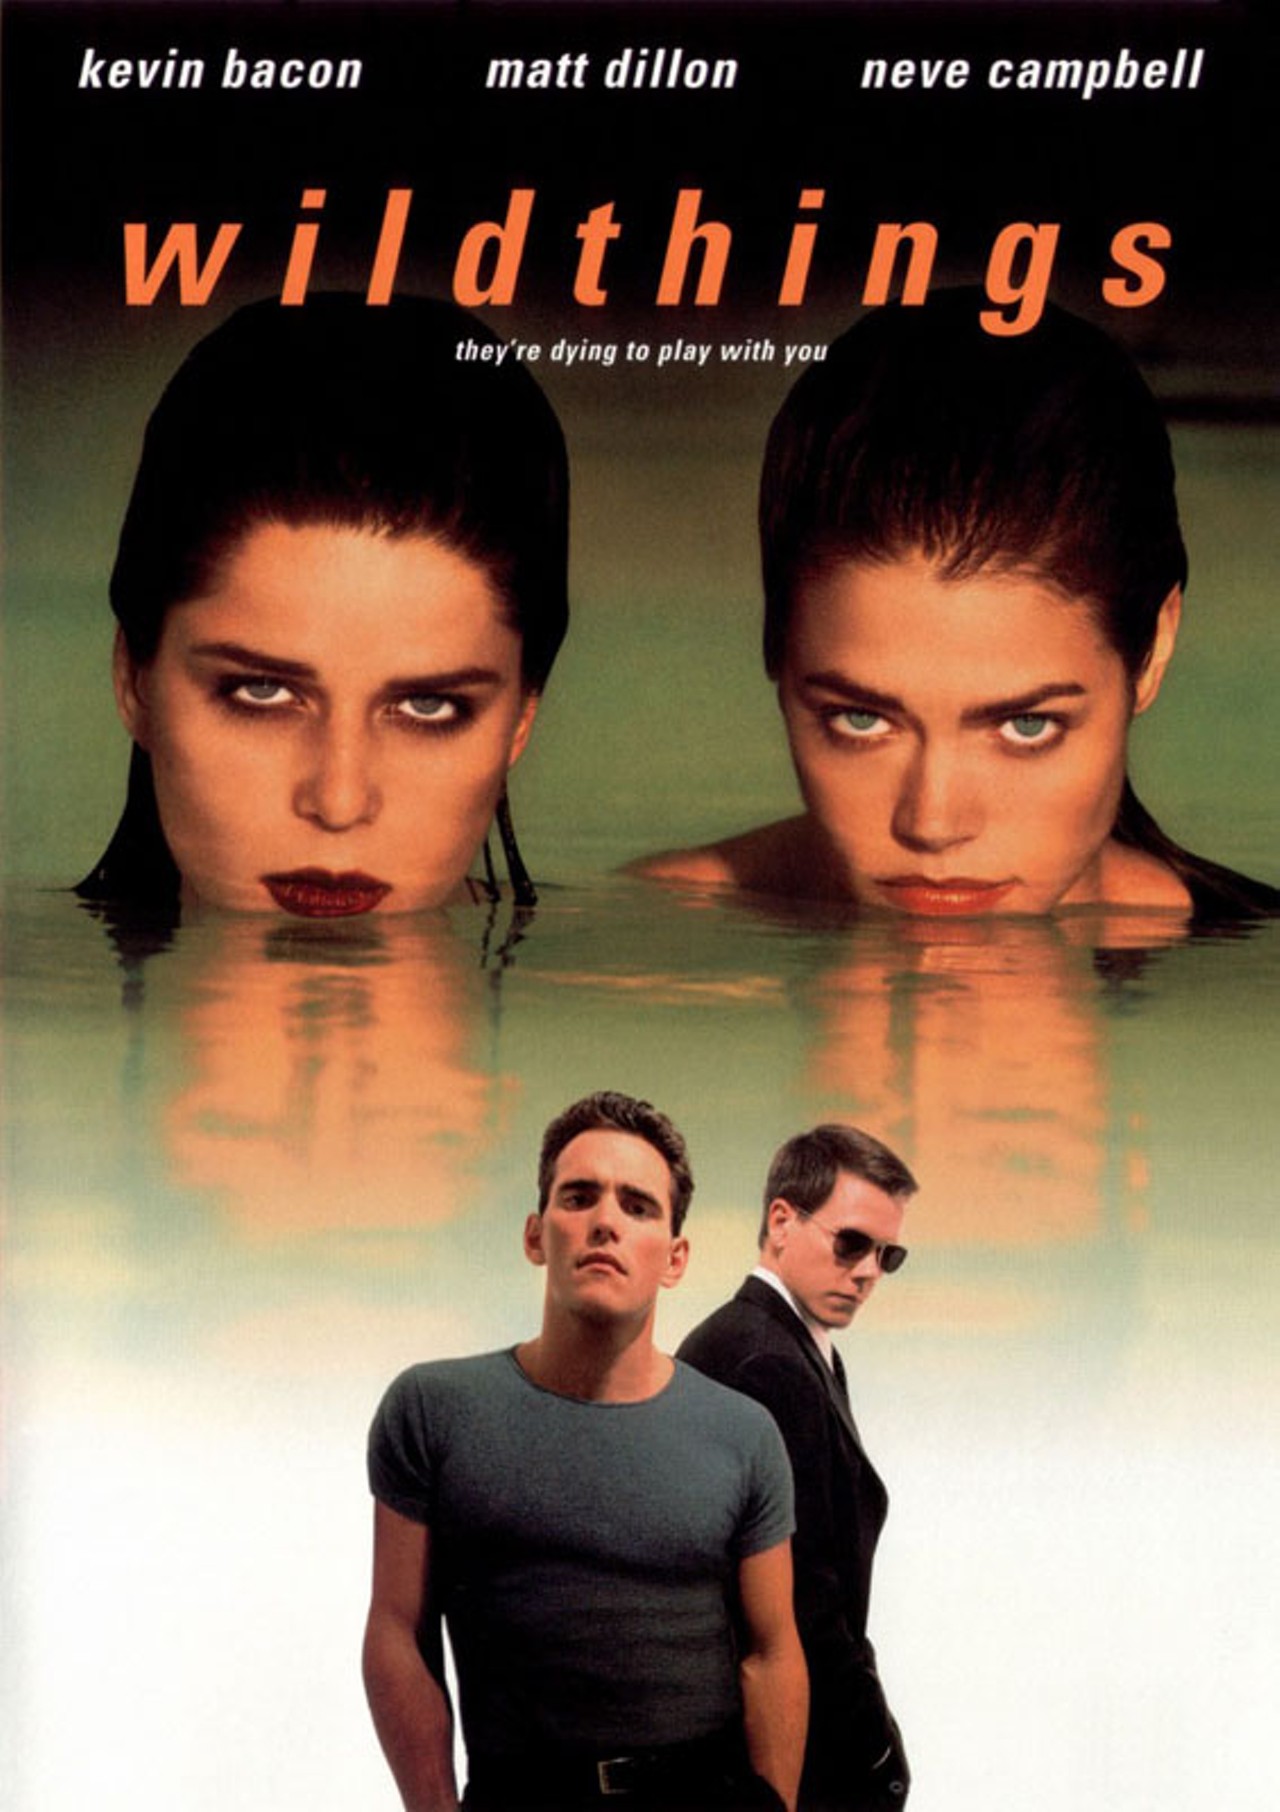 Wild Things (1998)
Think of it as endless endings. John McNaughton's playful erotic thriller about a larcenous school teacher, a pair of greedy coeds, and the cop on their trail has as many twists as there are characters, but it's all in good fun.